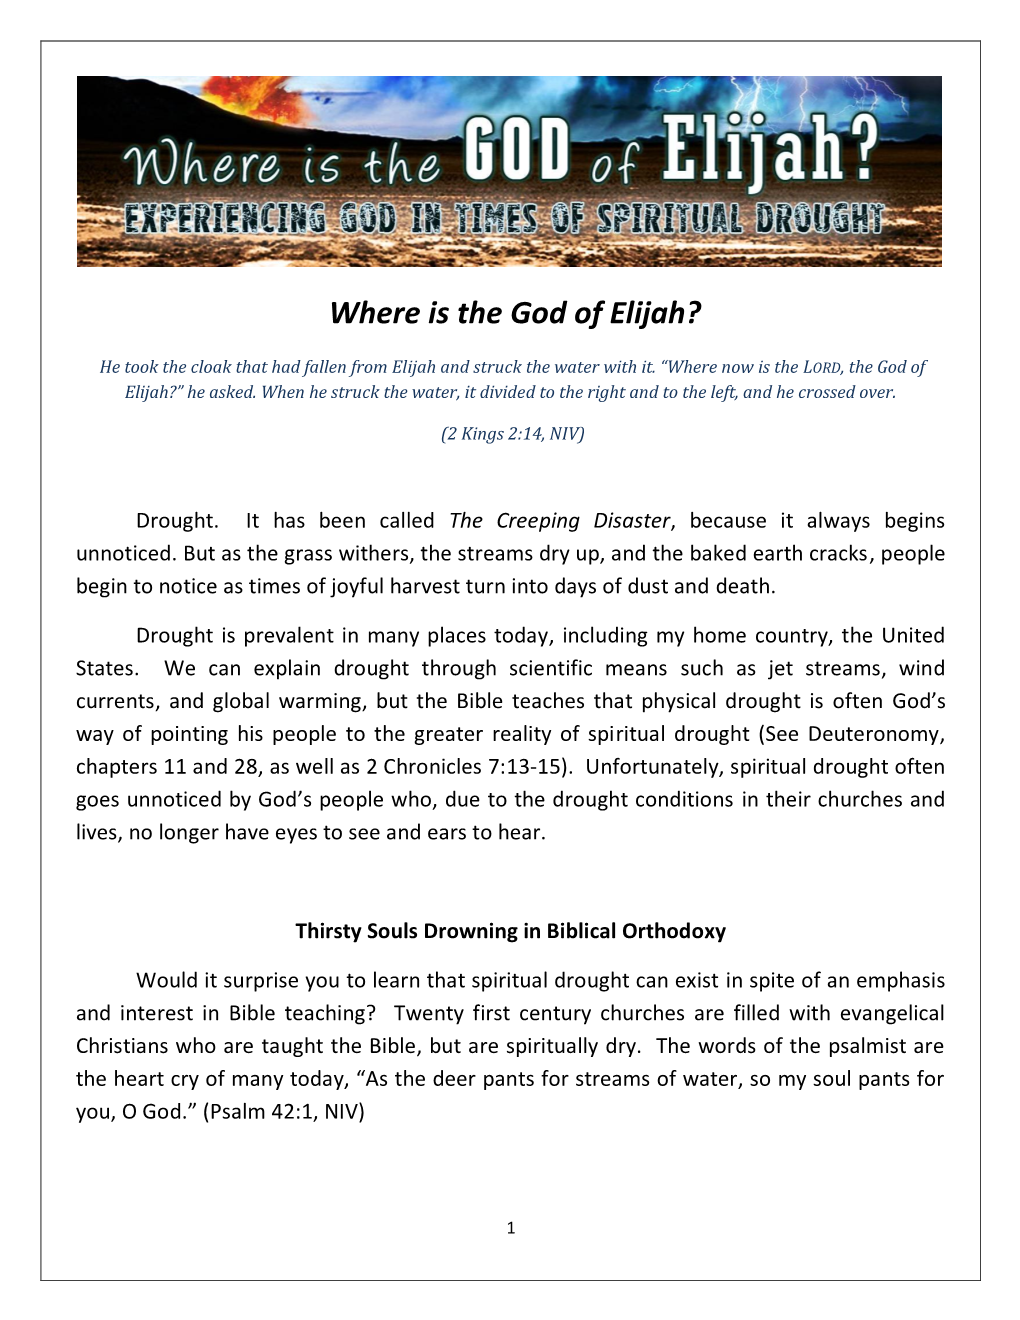 Where Is the God of Elijah?